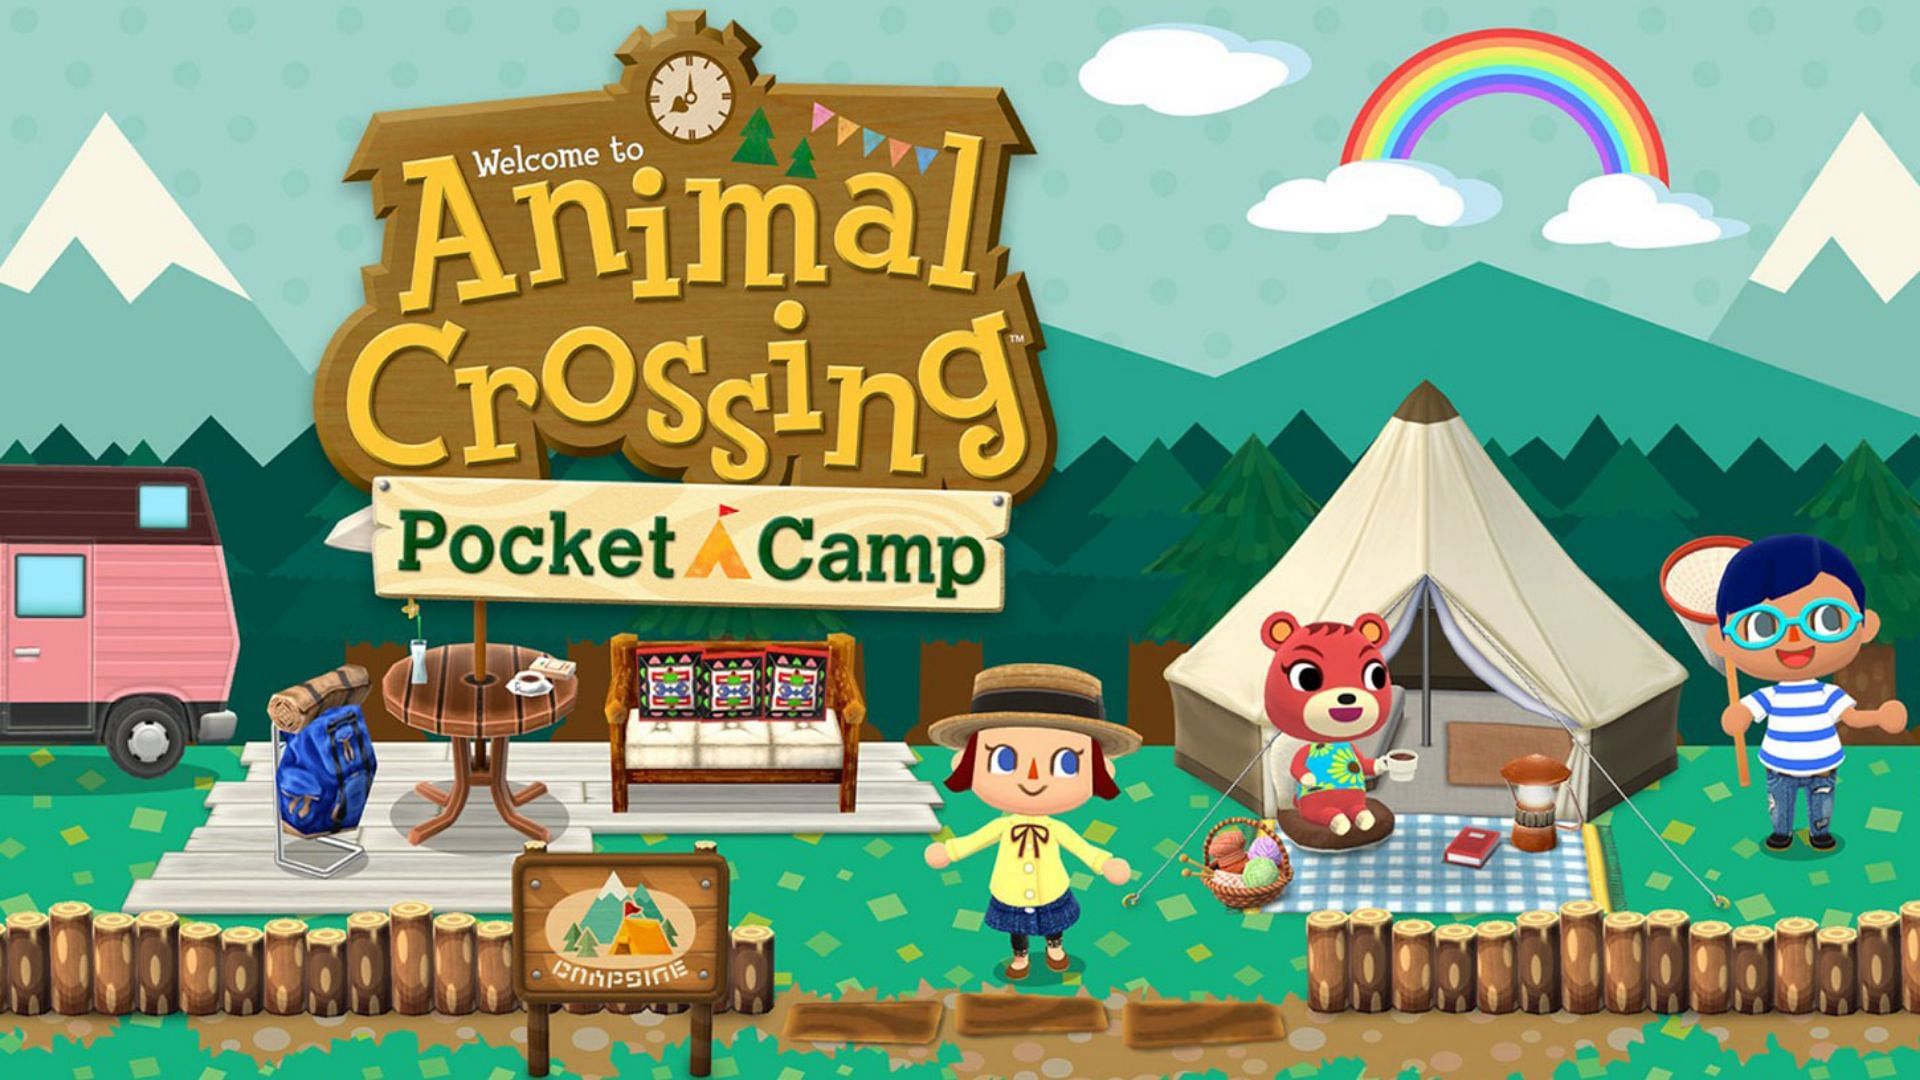 Animal Crossing: New Horizons fans seem to have no further hope for their beloved title after the Pocket Camp update (Image via Sensor Tower)